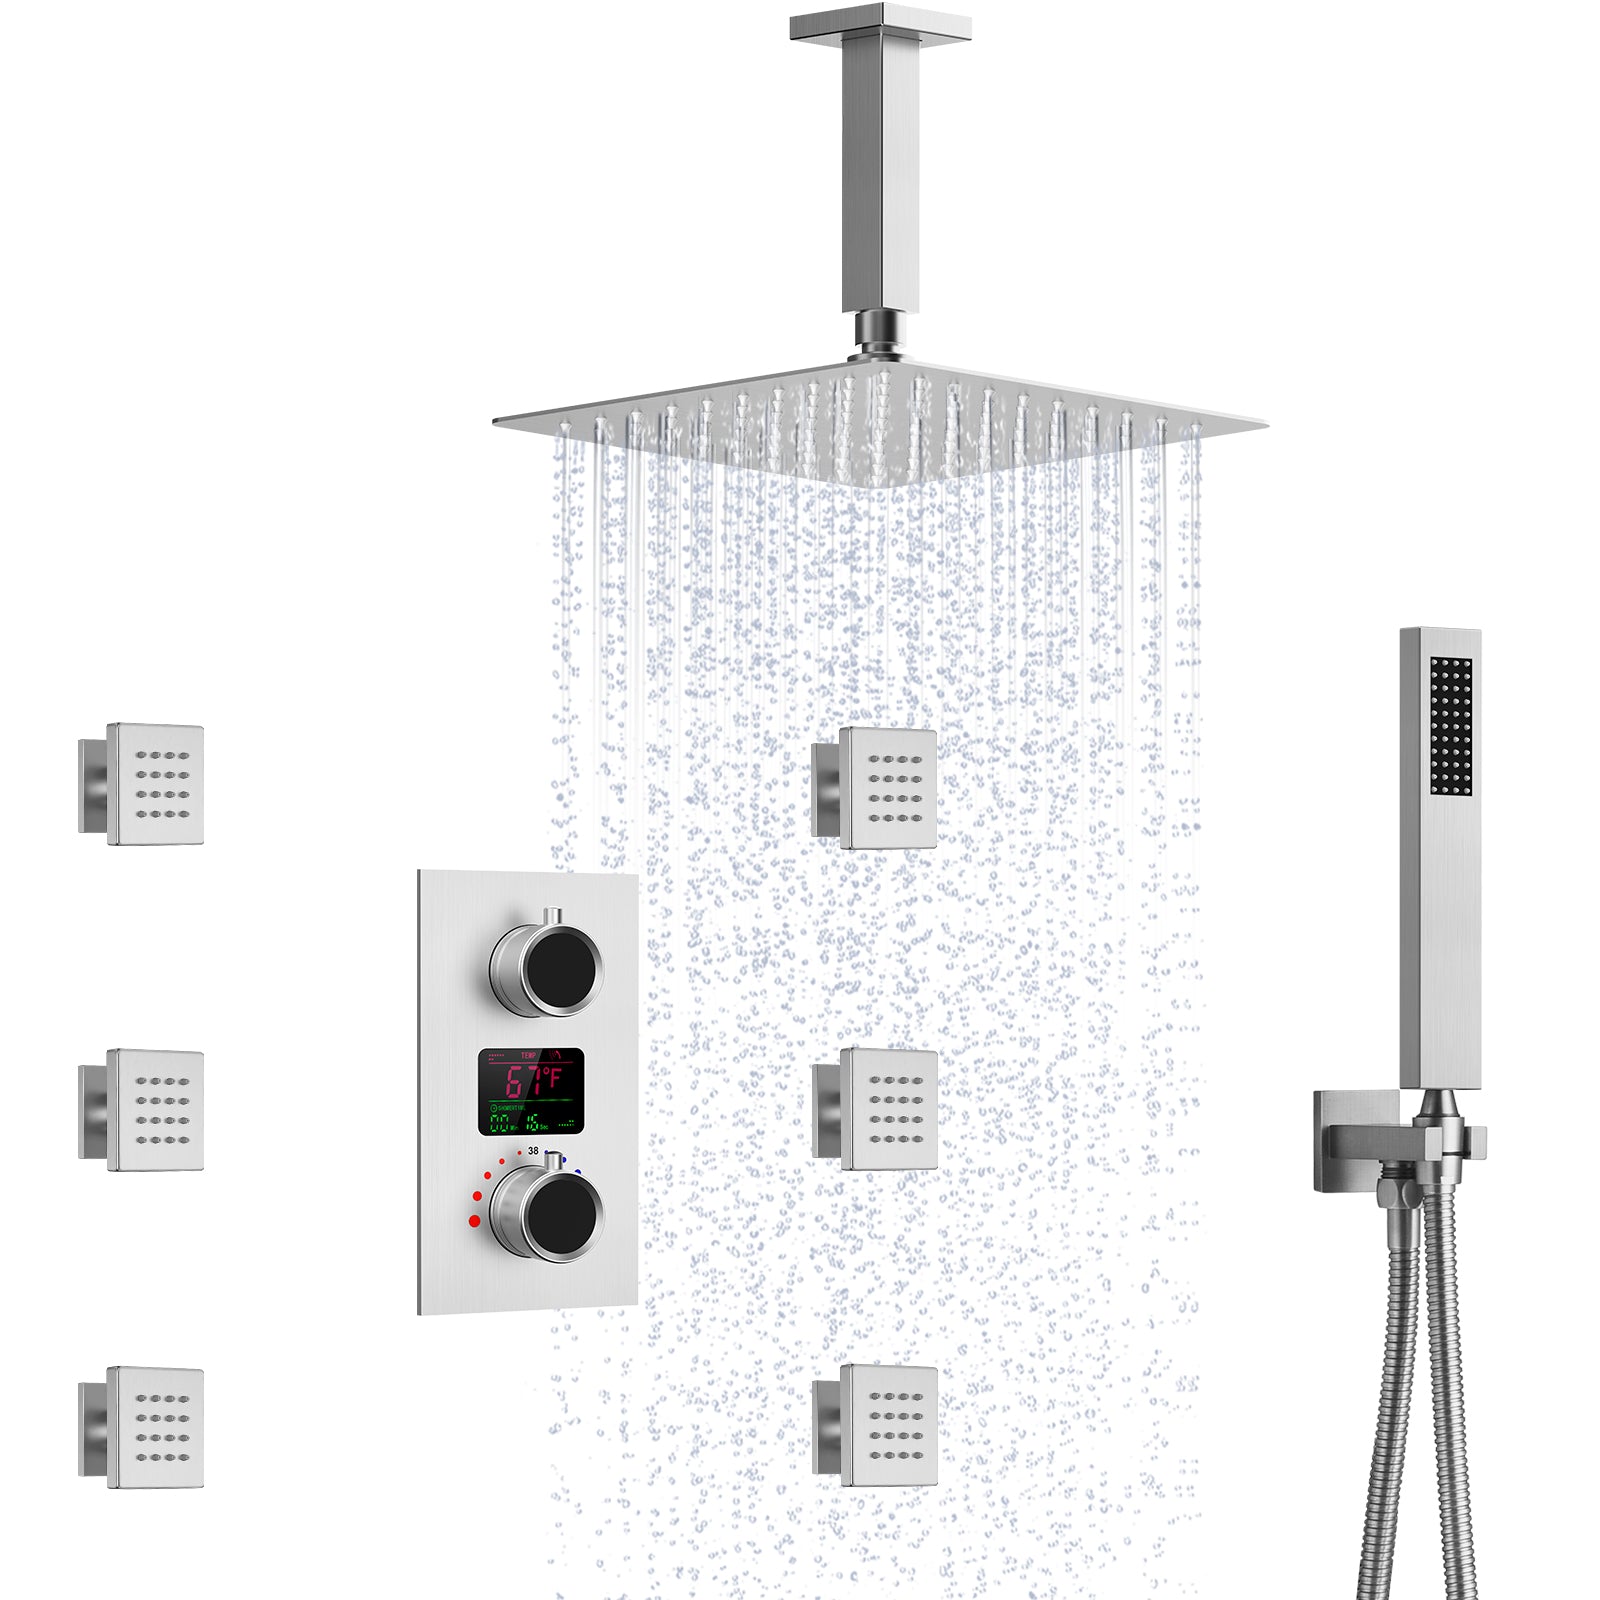 SFS-1015-NK12 EVERSTEIN Ceiling installation Constant Temperature Shower Faucet with LED Display Rain Shower System, with 6 Massage Nozzles and Hand-held Spray,Brushed Nickel